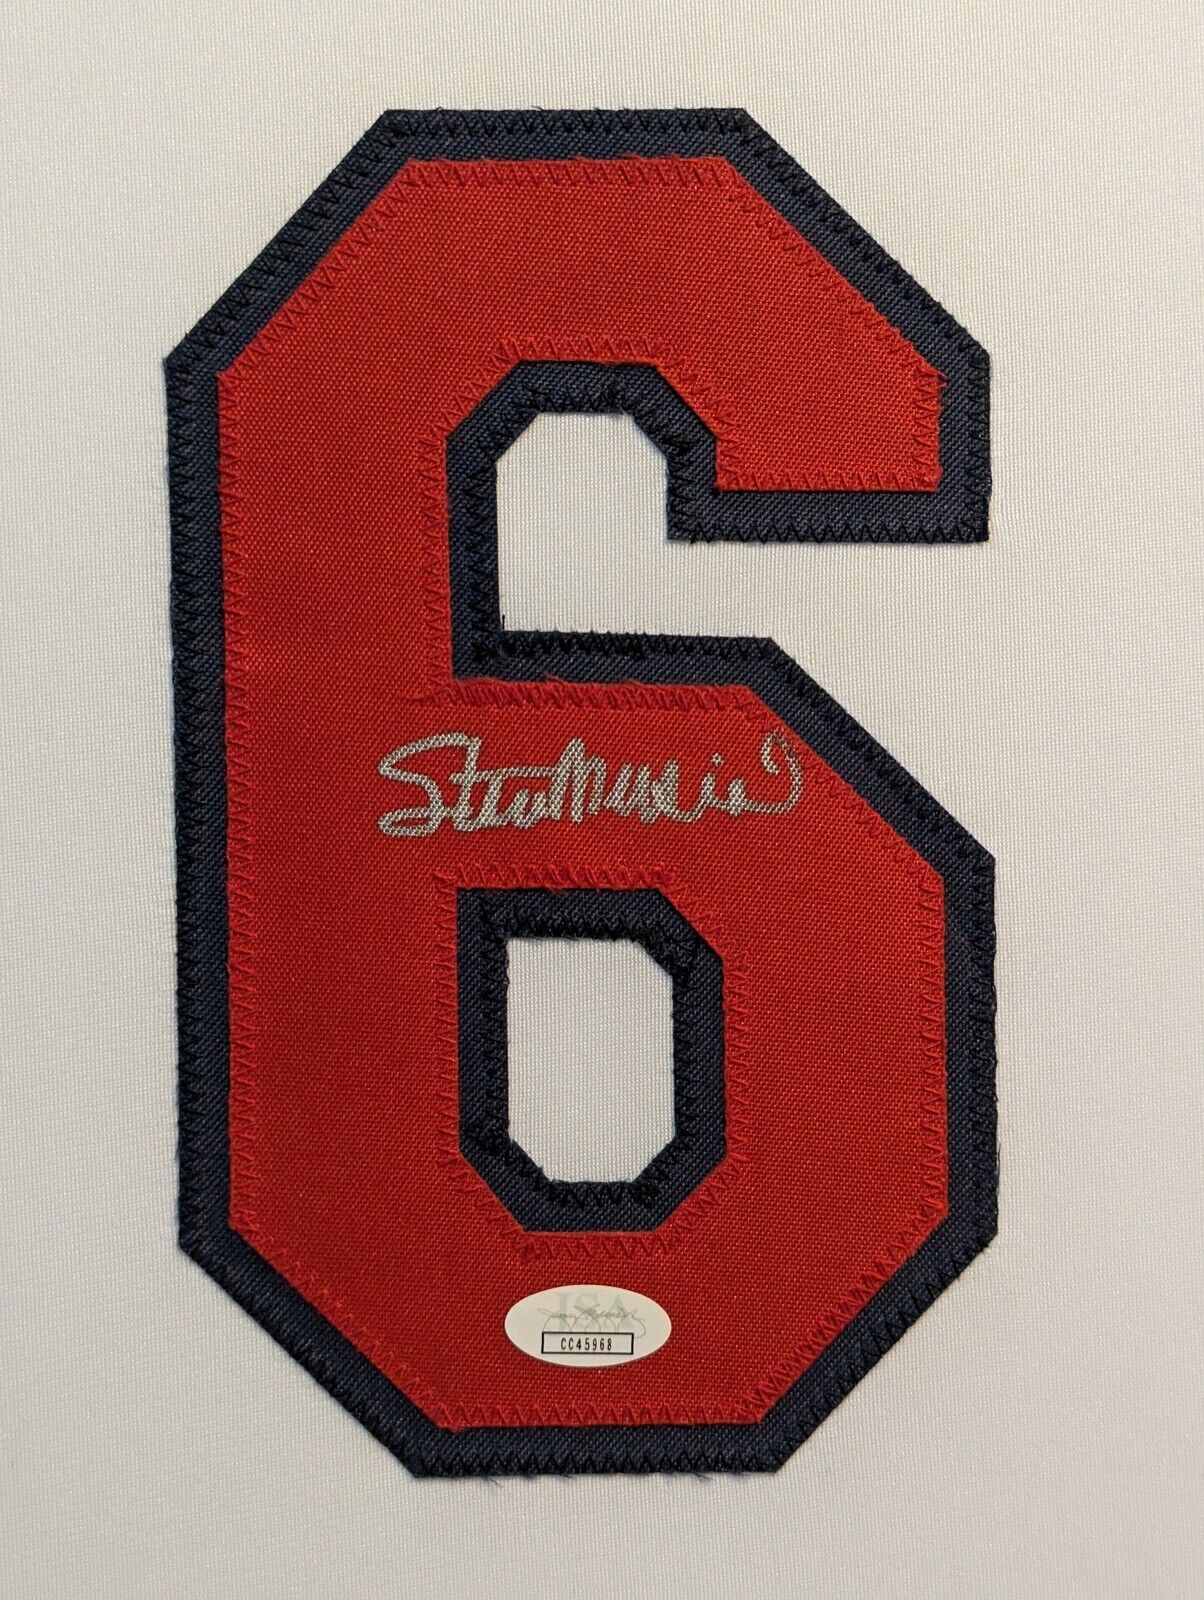 MVP Authentics Framed In Suede St Louis Cardinals Stan Musial Autographed Jersey Jsa Coa 1125 sports jersey framing , jersey framing